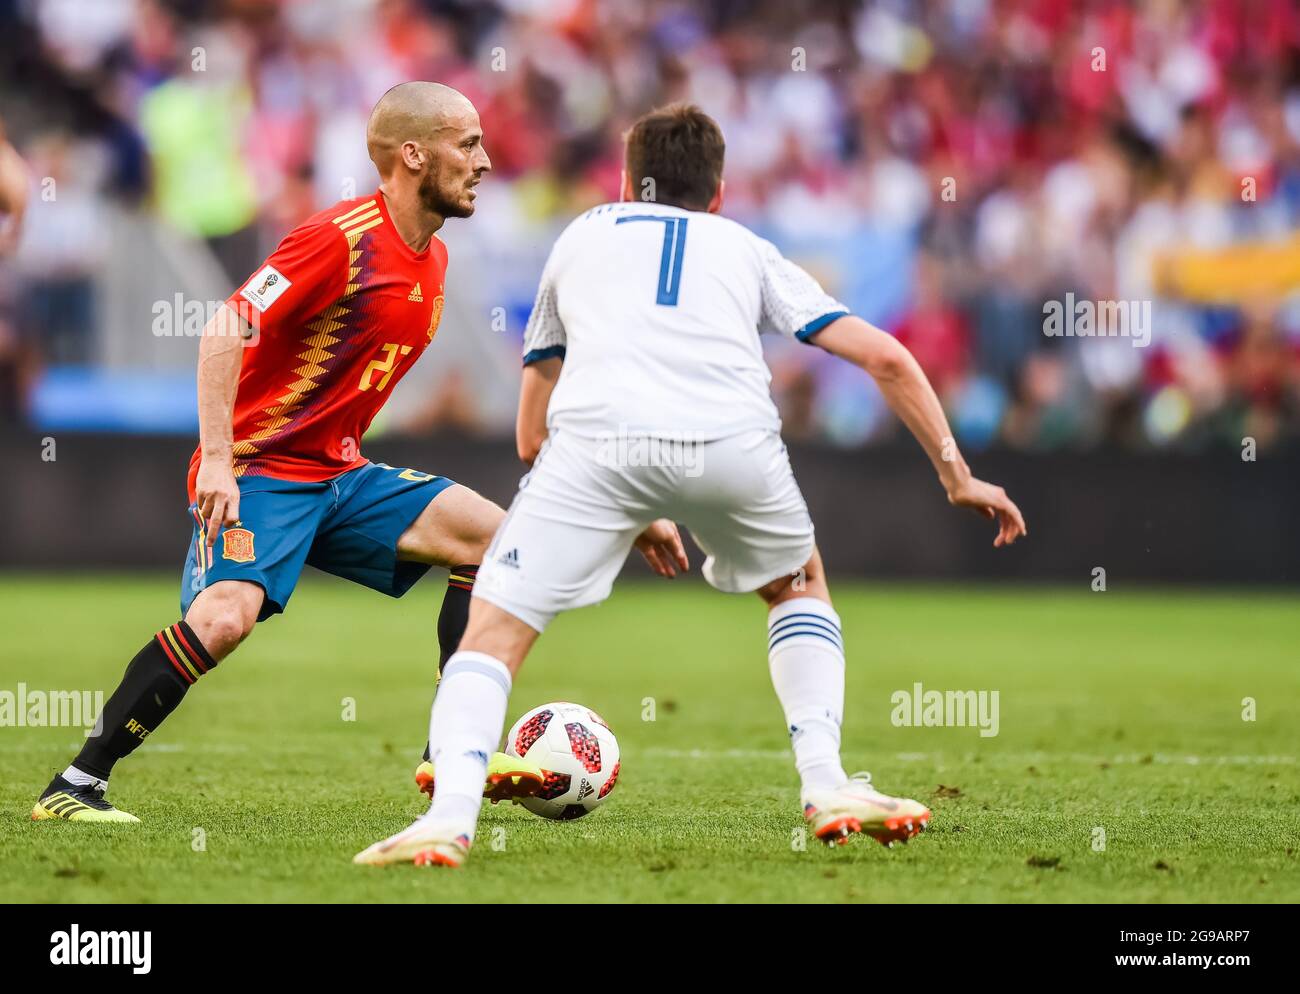 Moscow, Russia - July 1, 2018. Spain national football team midfielder David Silva in action during FIFA World Cup 2018 Round of 16 match Spain vs Rus Stock Photo